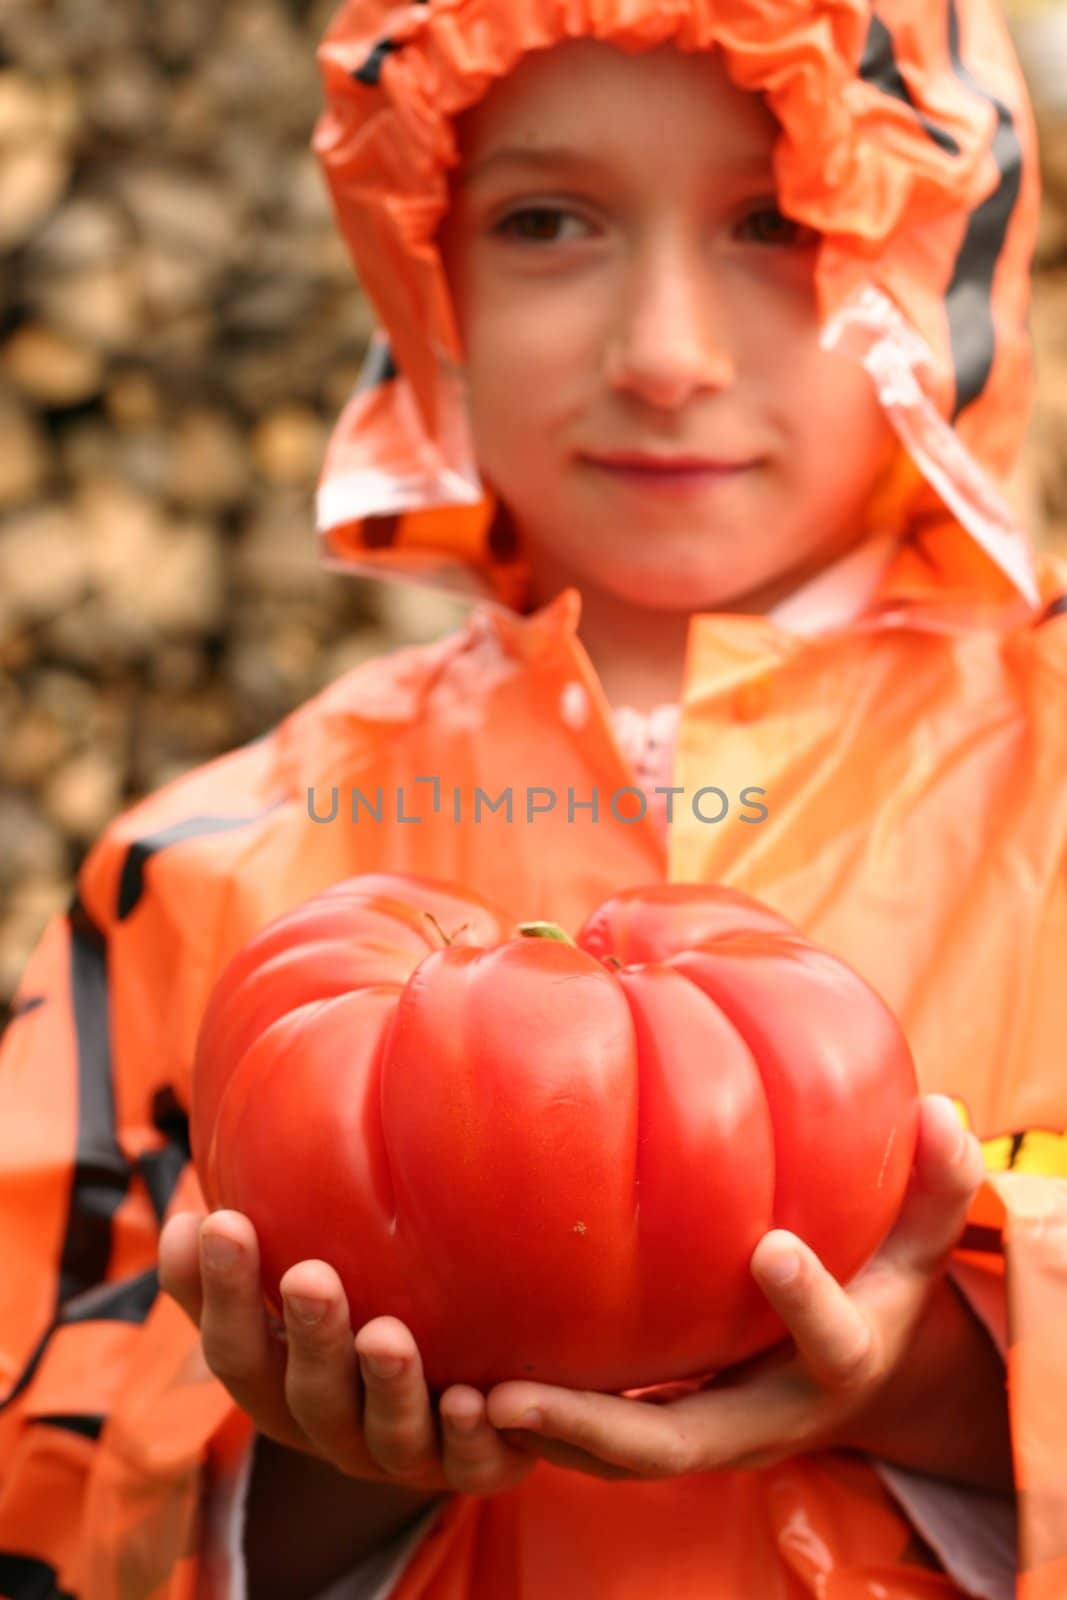 boy in a orange raincoat holding a big red tomato in his hands